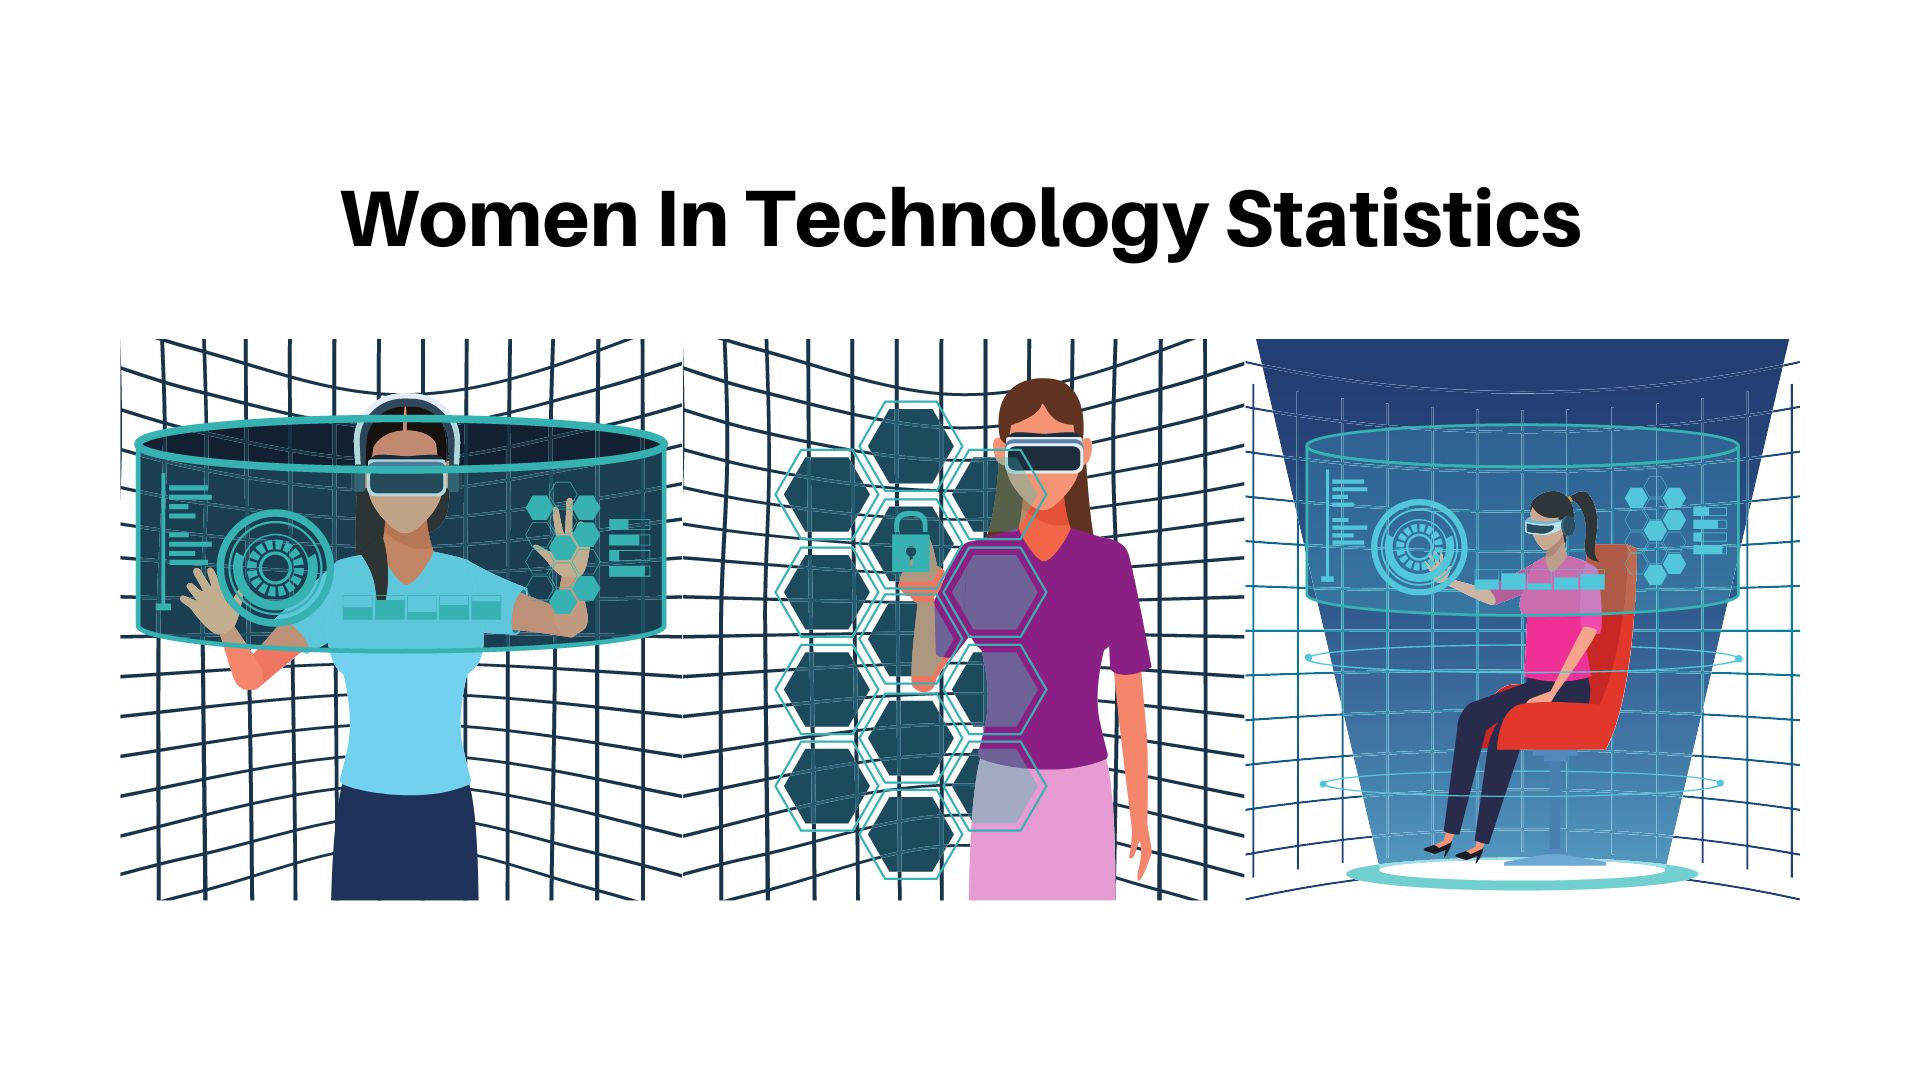 Women In Technology Statistics By Sector, Companies, Education and Countries